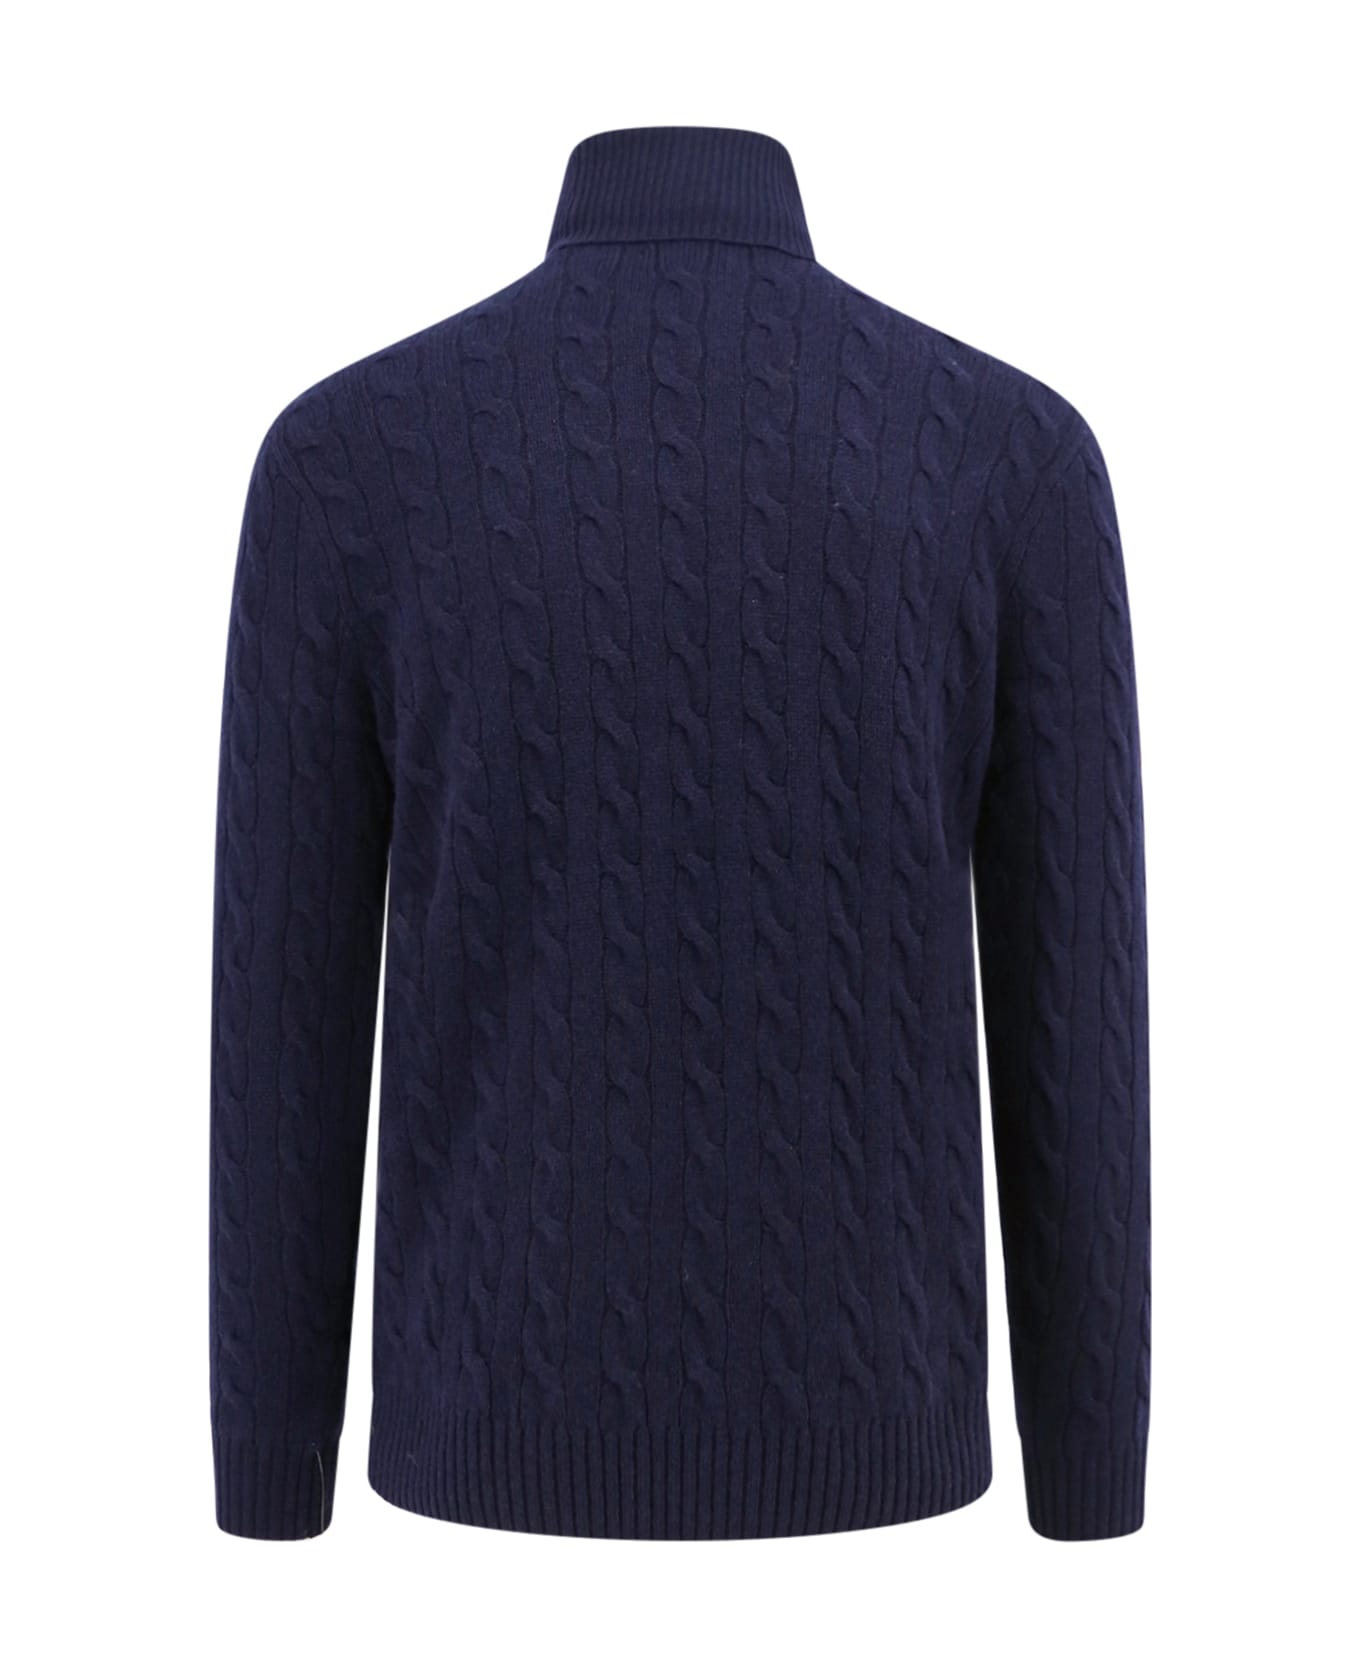 Polo Ralph Lauren Logo Embroidery Turtleneck Patterned Sweater - Blue